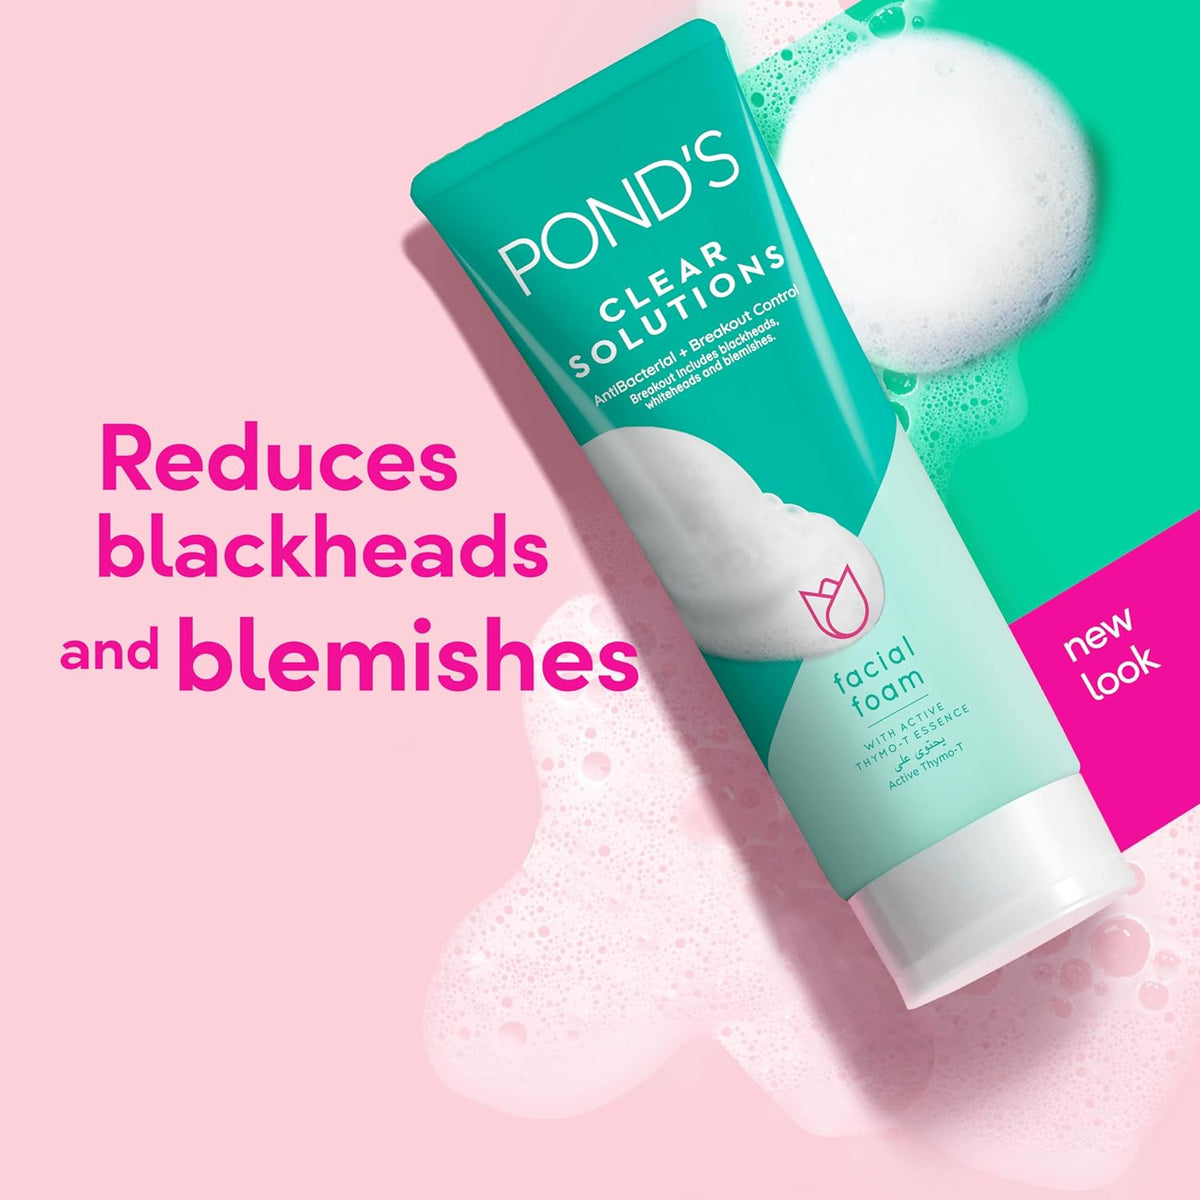 POND'S Clear Solutions Facial Foam with Active Thymo-T Essence, Antibacterial + Breakout Control, gives purified skin in just 3 days, 100g